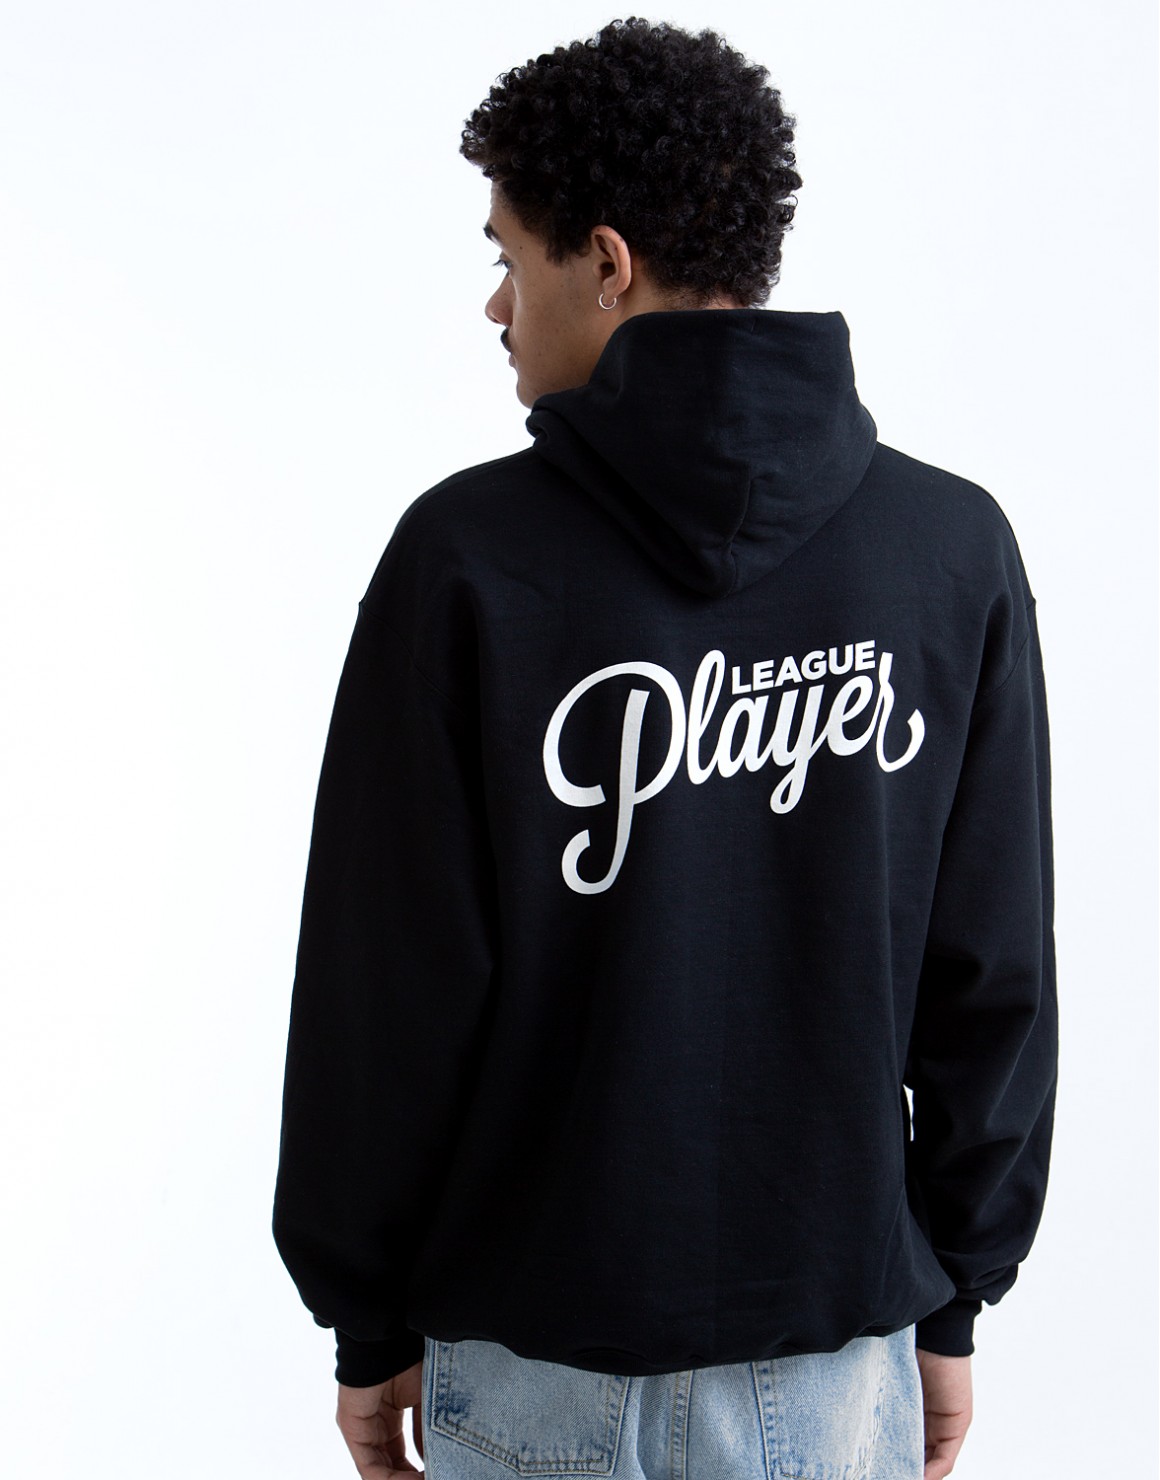 ALLTIMERS LEAGUE PLAYERS CHAMPION HOODIE